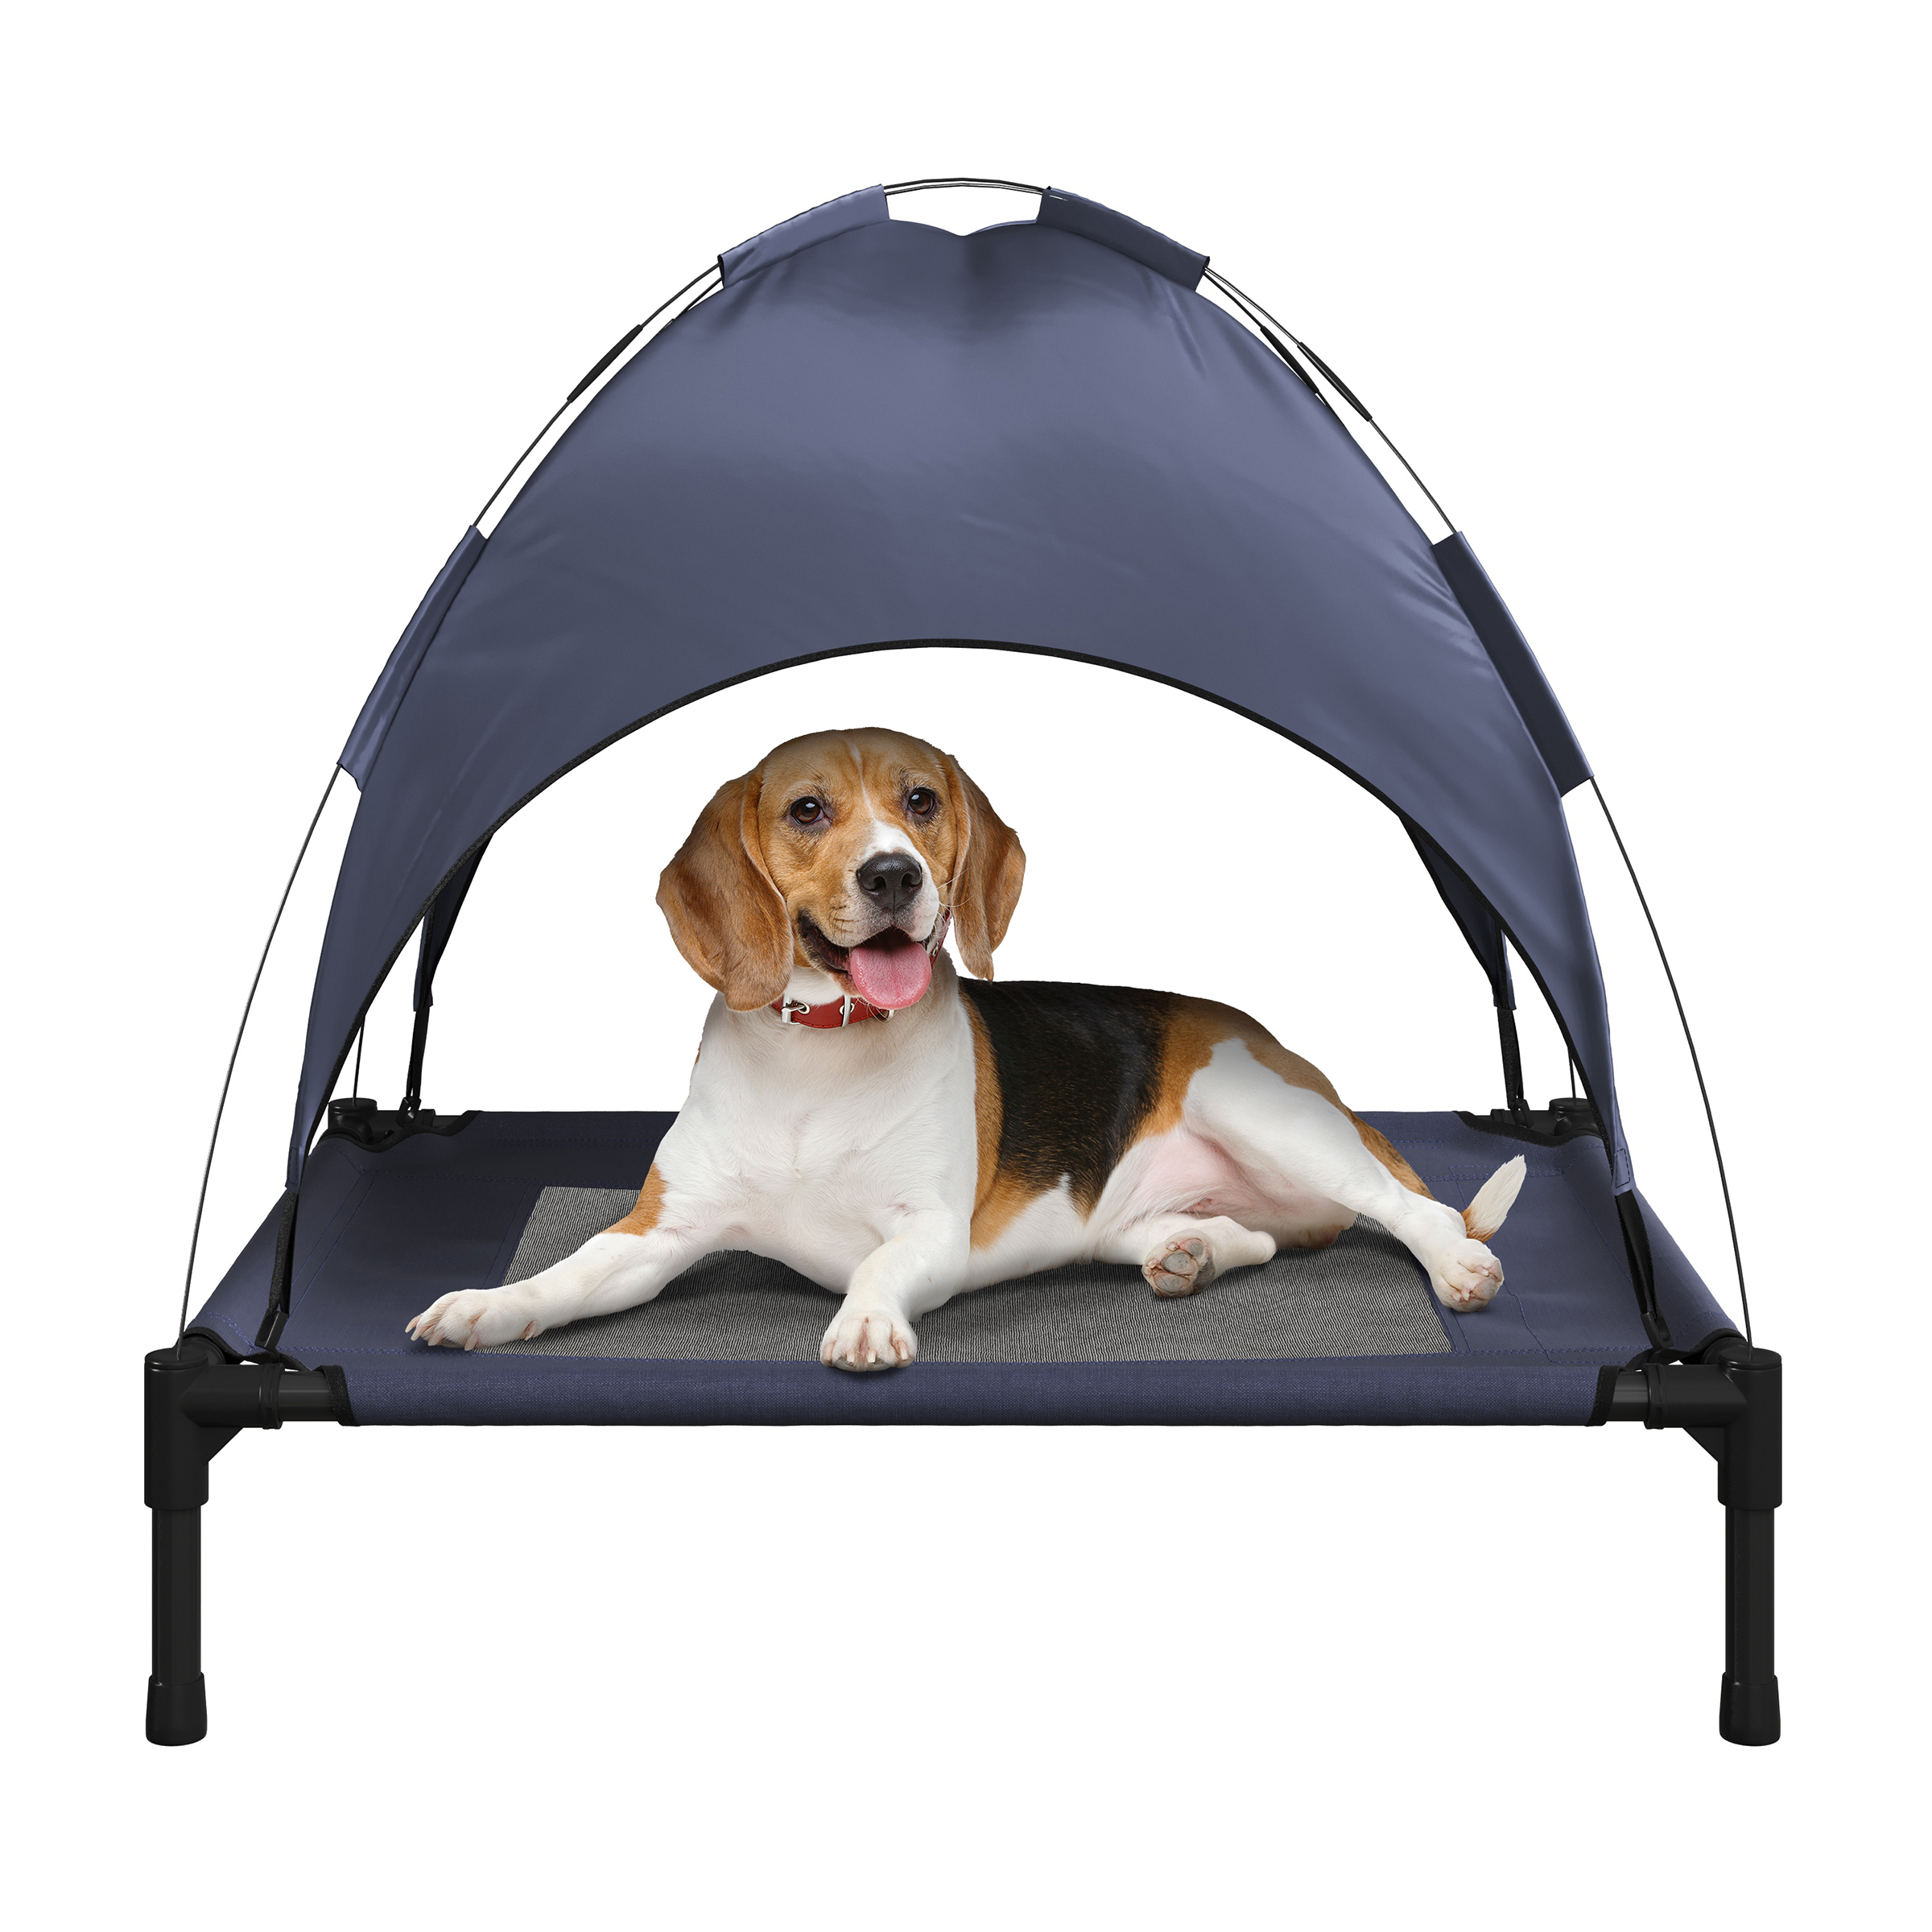 Elevated Dog Bed With Canopy - 30x24-Inch Portable Pet Bed With Non-Slip Feet - Indoor/Outdoor Dog Cot With Carrying Case By PETMAKER (Blue)